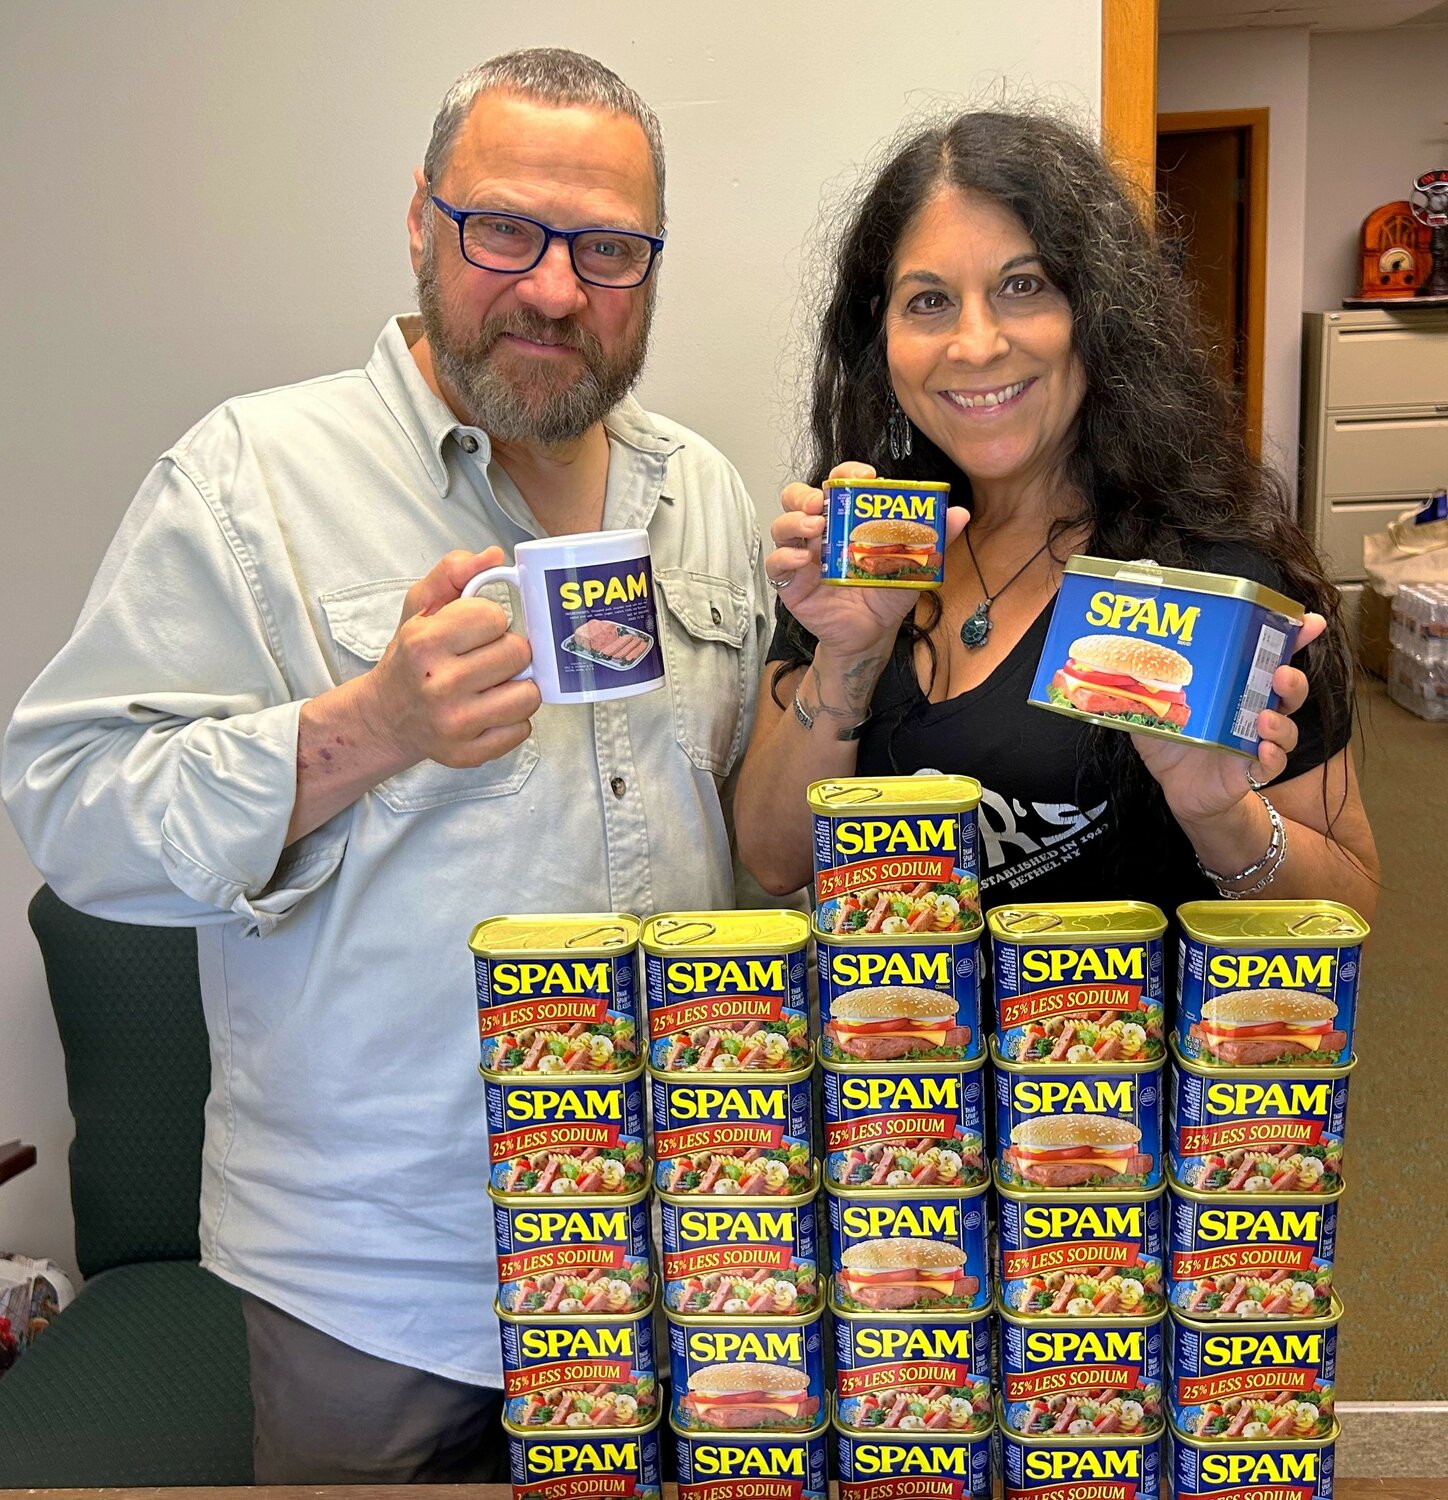 Try Kim's "Sweet and savory meat treat" recipe. Pictured are Paul Ciliberto, left; cans of SPAM; and Kim M. Simons.